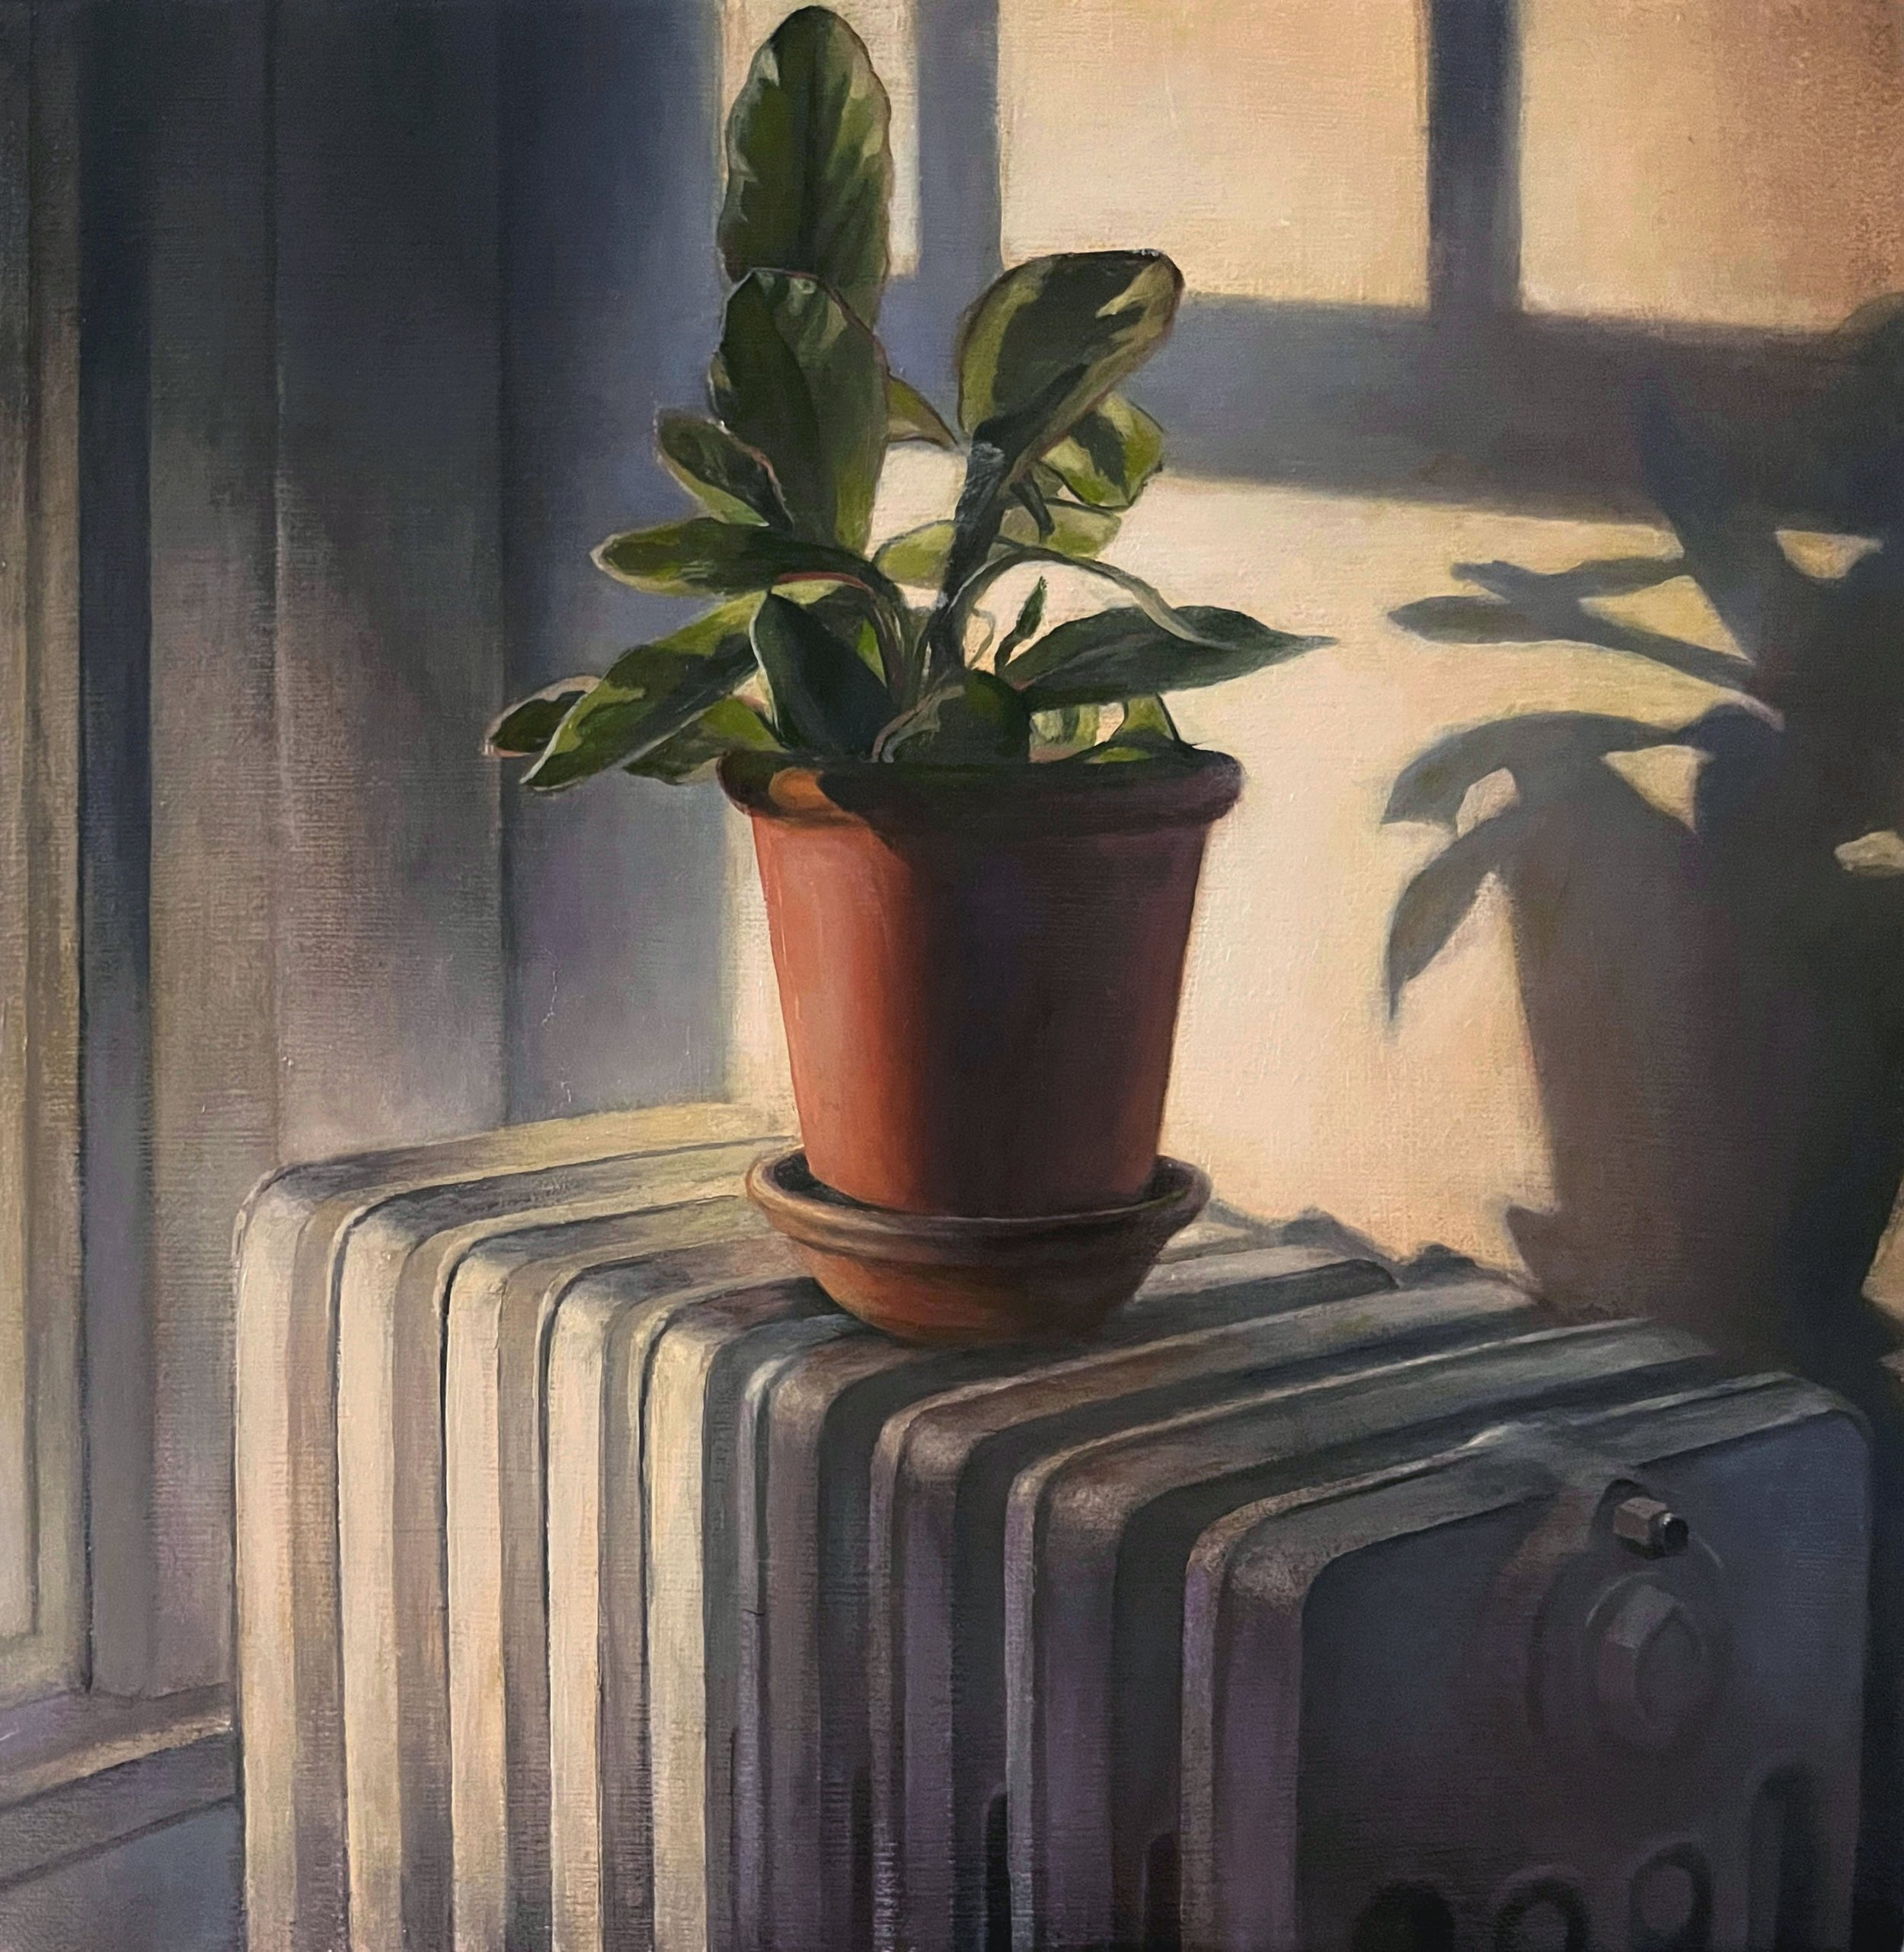   Houseplant in Light   2023  Oil on linen over panel  10 x 10 inches   